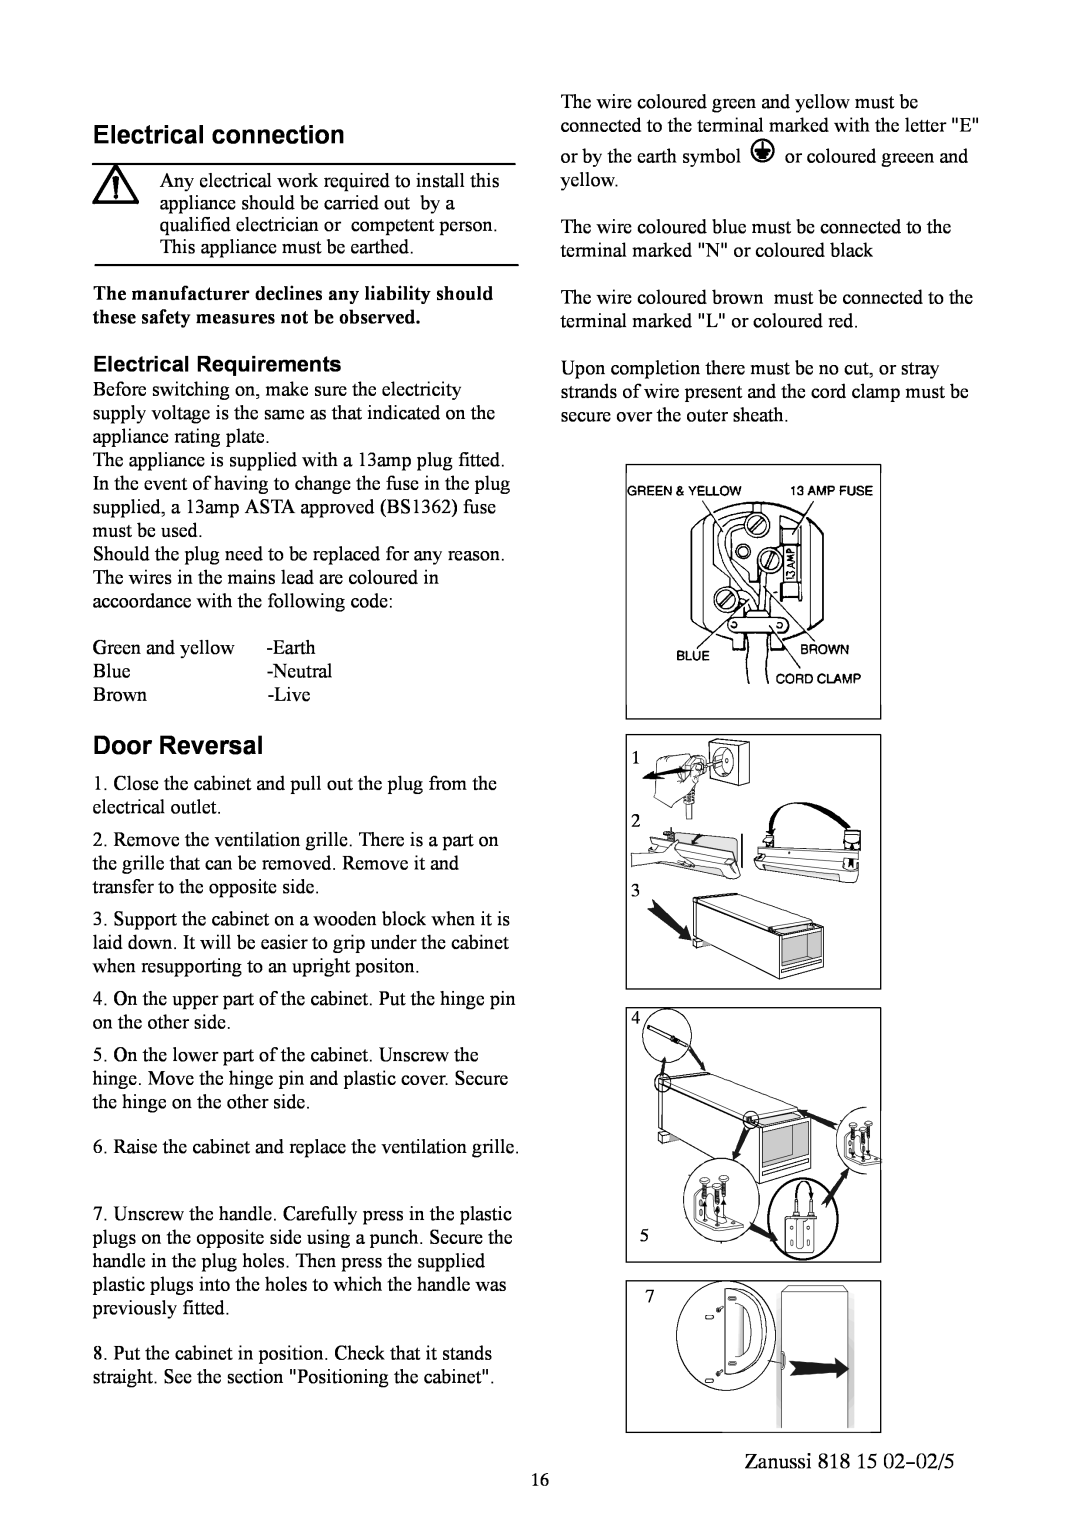 Zanussi ZVR11R manual Electrical connection, Door Reversal, Electrical Requirements, Zanussi 818 15 02--02/5 